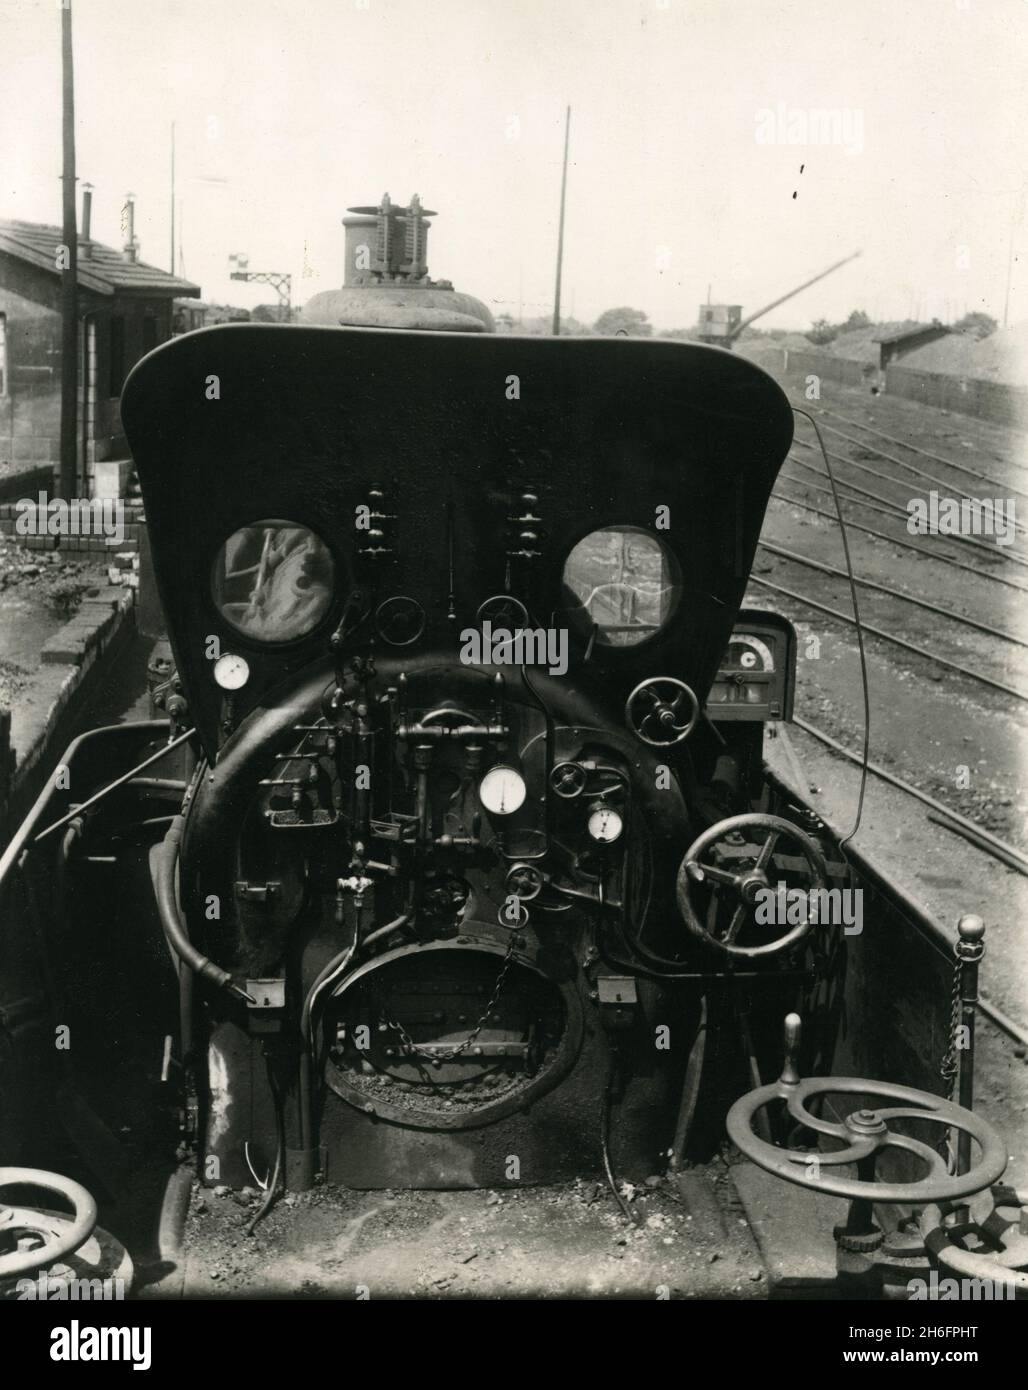 Commanding console of an old railway locomotives, France 1940s Stock Photo